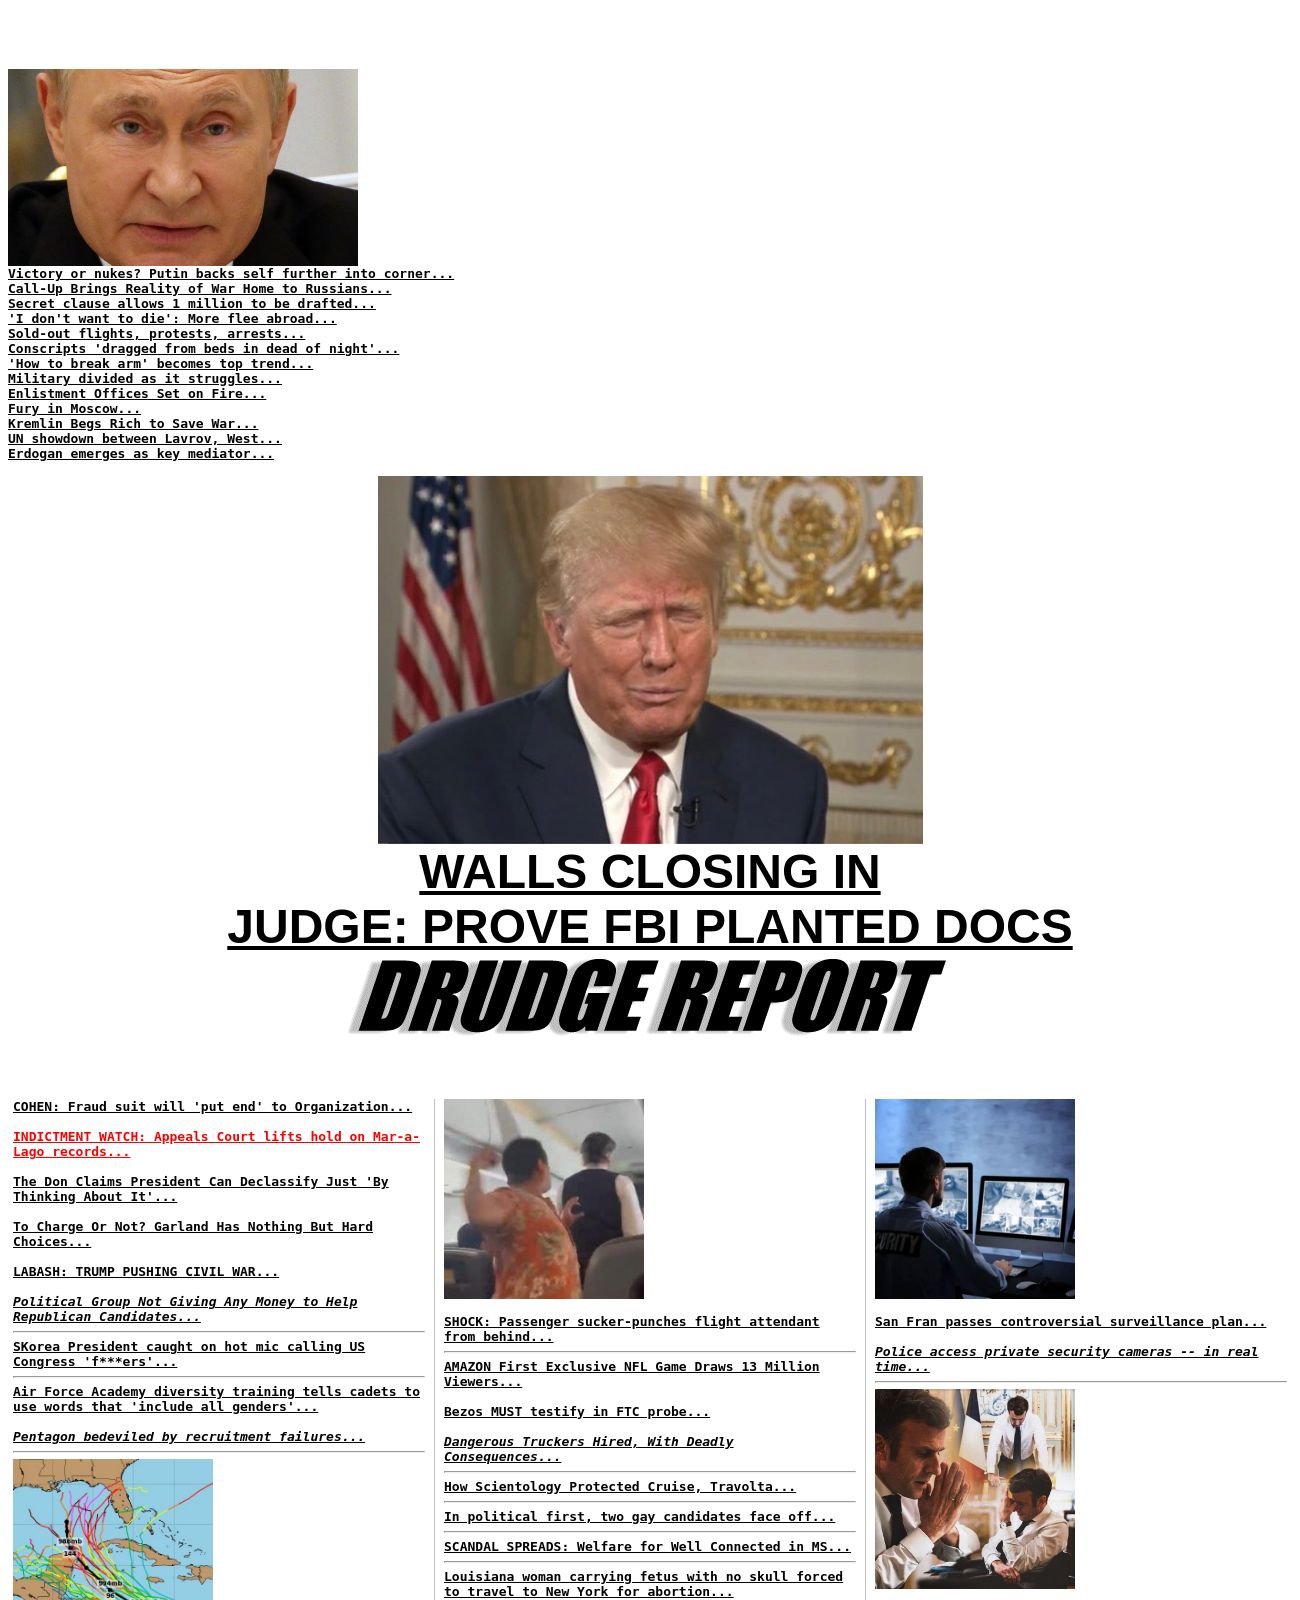 Drudge Report at 2022-09-22 19:47:30-04:00 local time